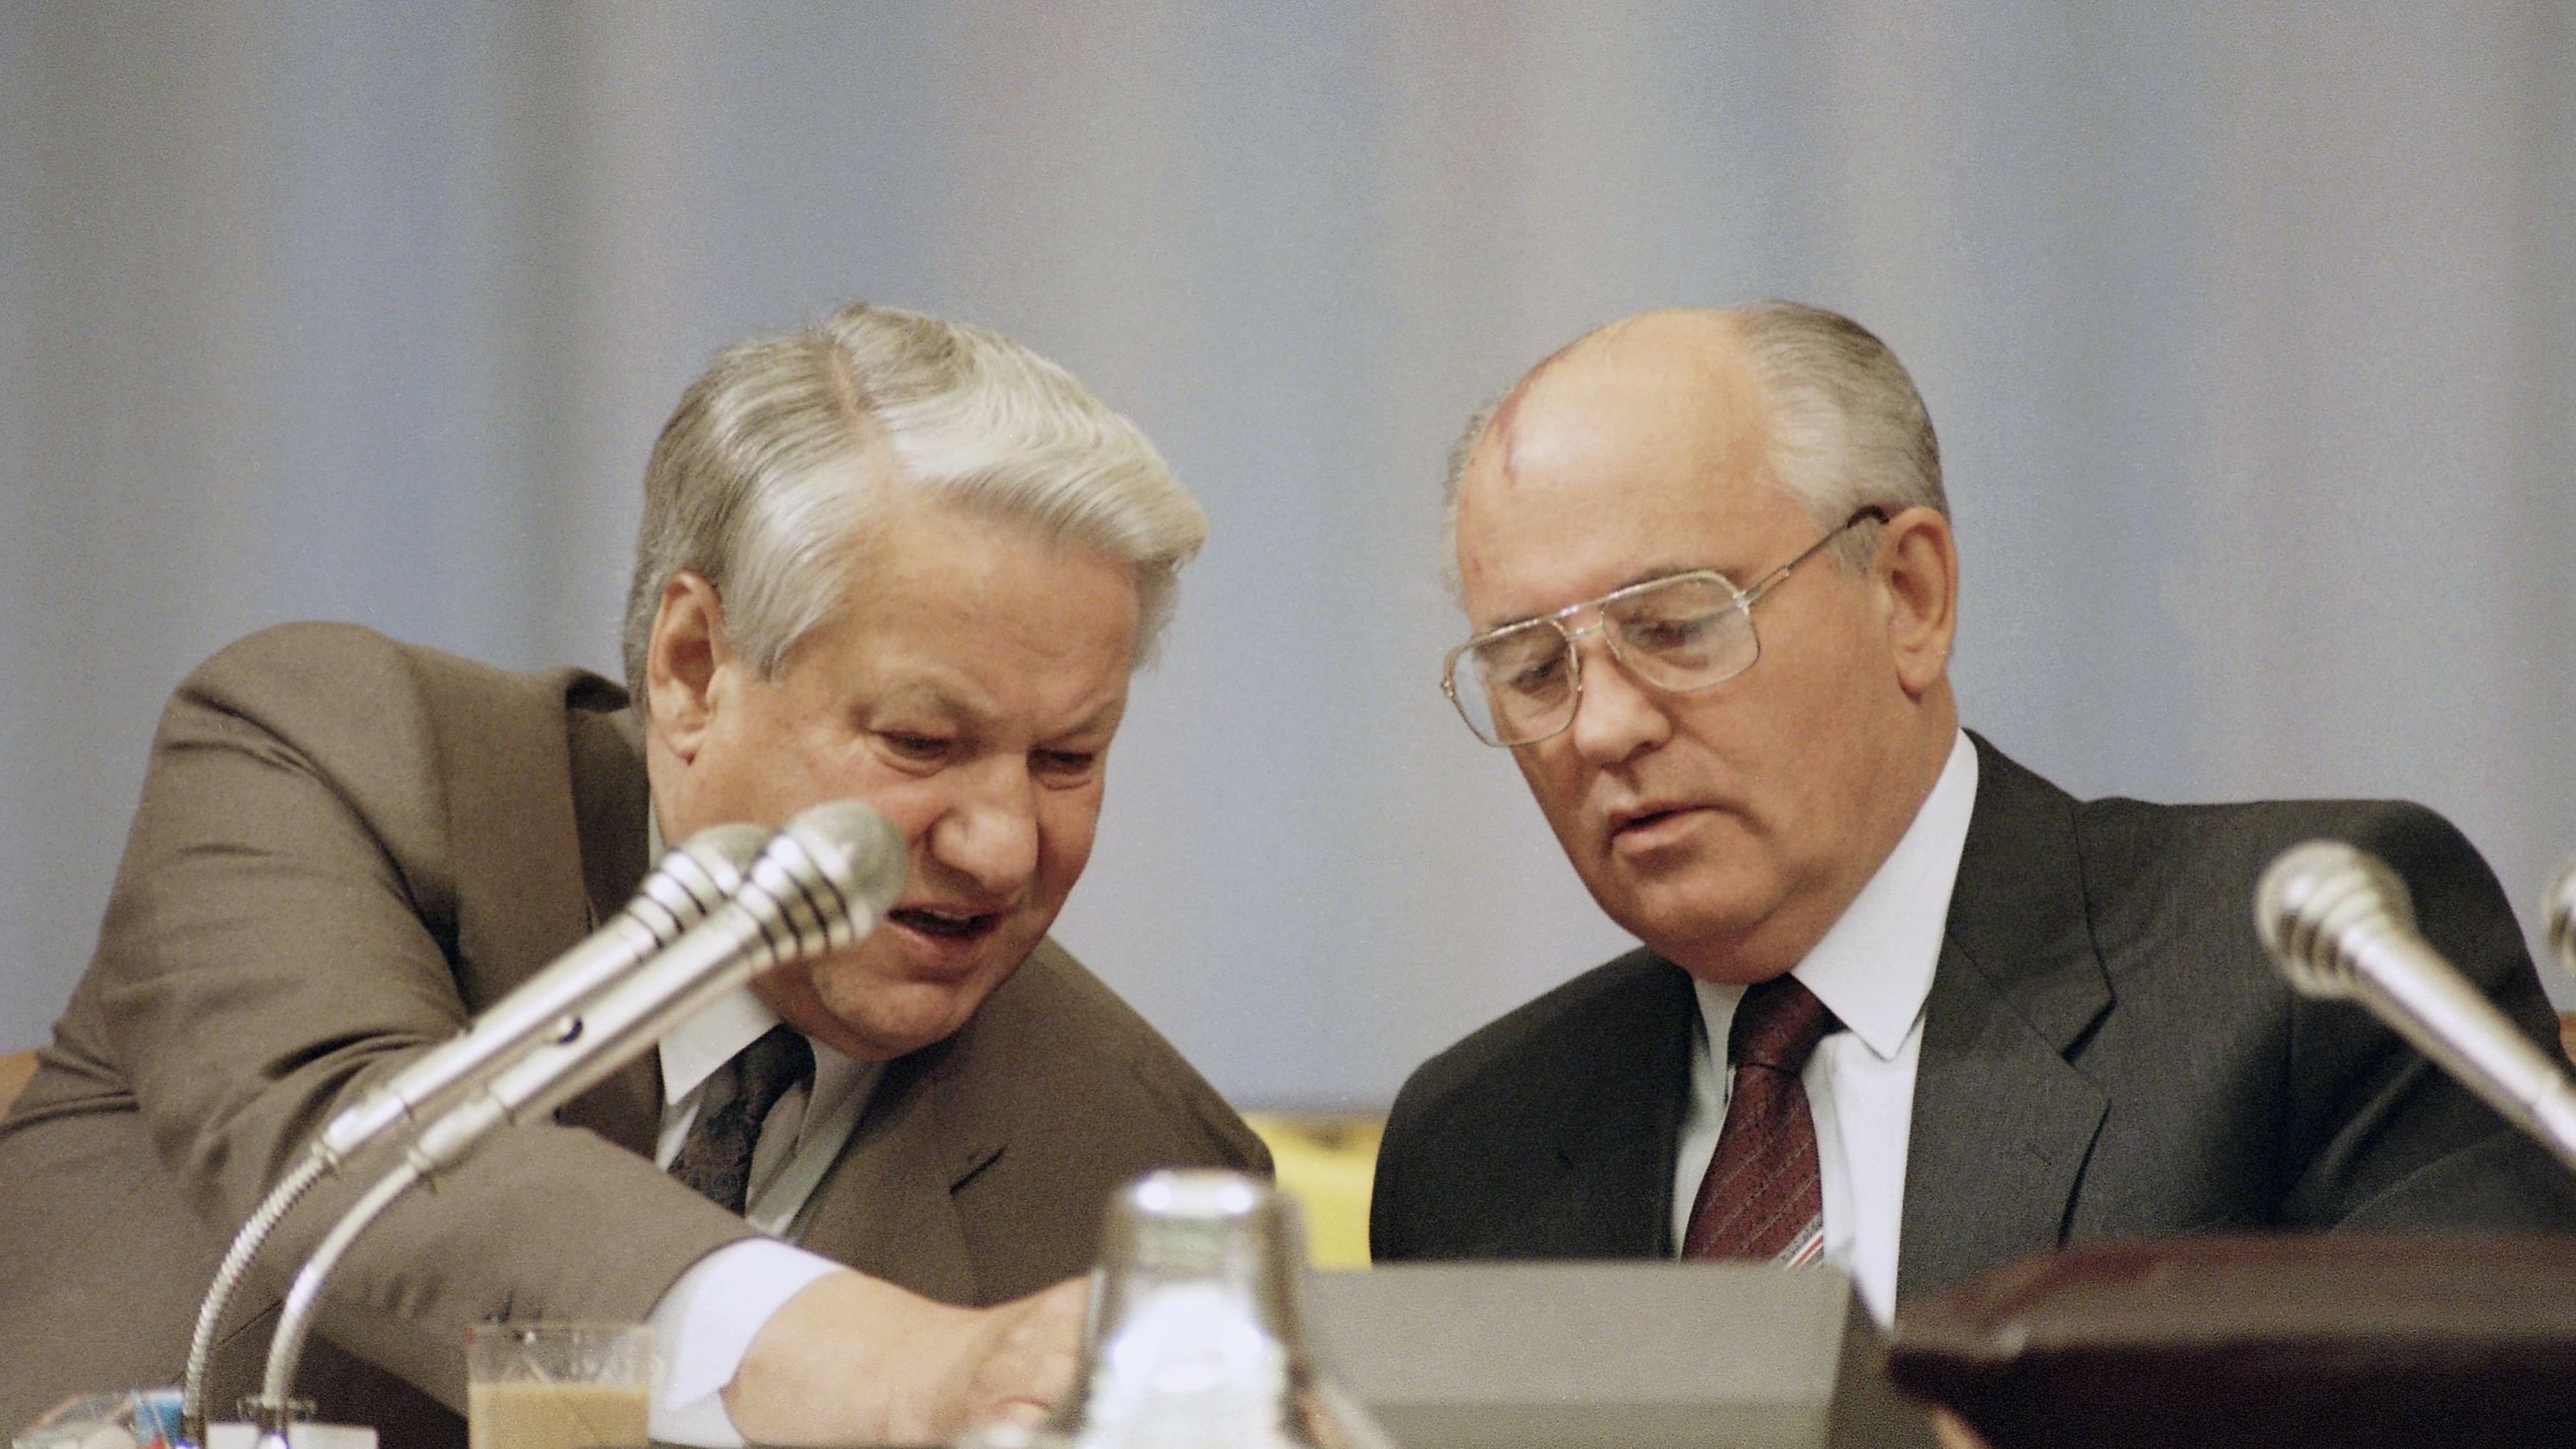 Russian Federation President Boris Yeltsin, left, and Soviet President Gorbachev look over a document while attending the Congress of People's Deputies in Moscow in September 1991. While vacationing in the Crimean peninsula, Gorbachev was ousted in a coup by Communist hard-liners on August 19, 1991. The coup soon faltered as citizens took to the streets of Moscow and other cities in support of Yeltsin, who denounced the coup. Yeltsin was the first democratically elected president of Russia.